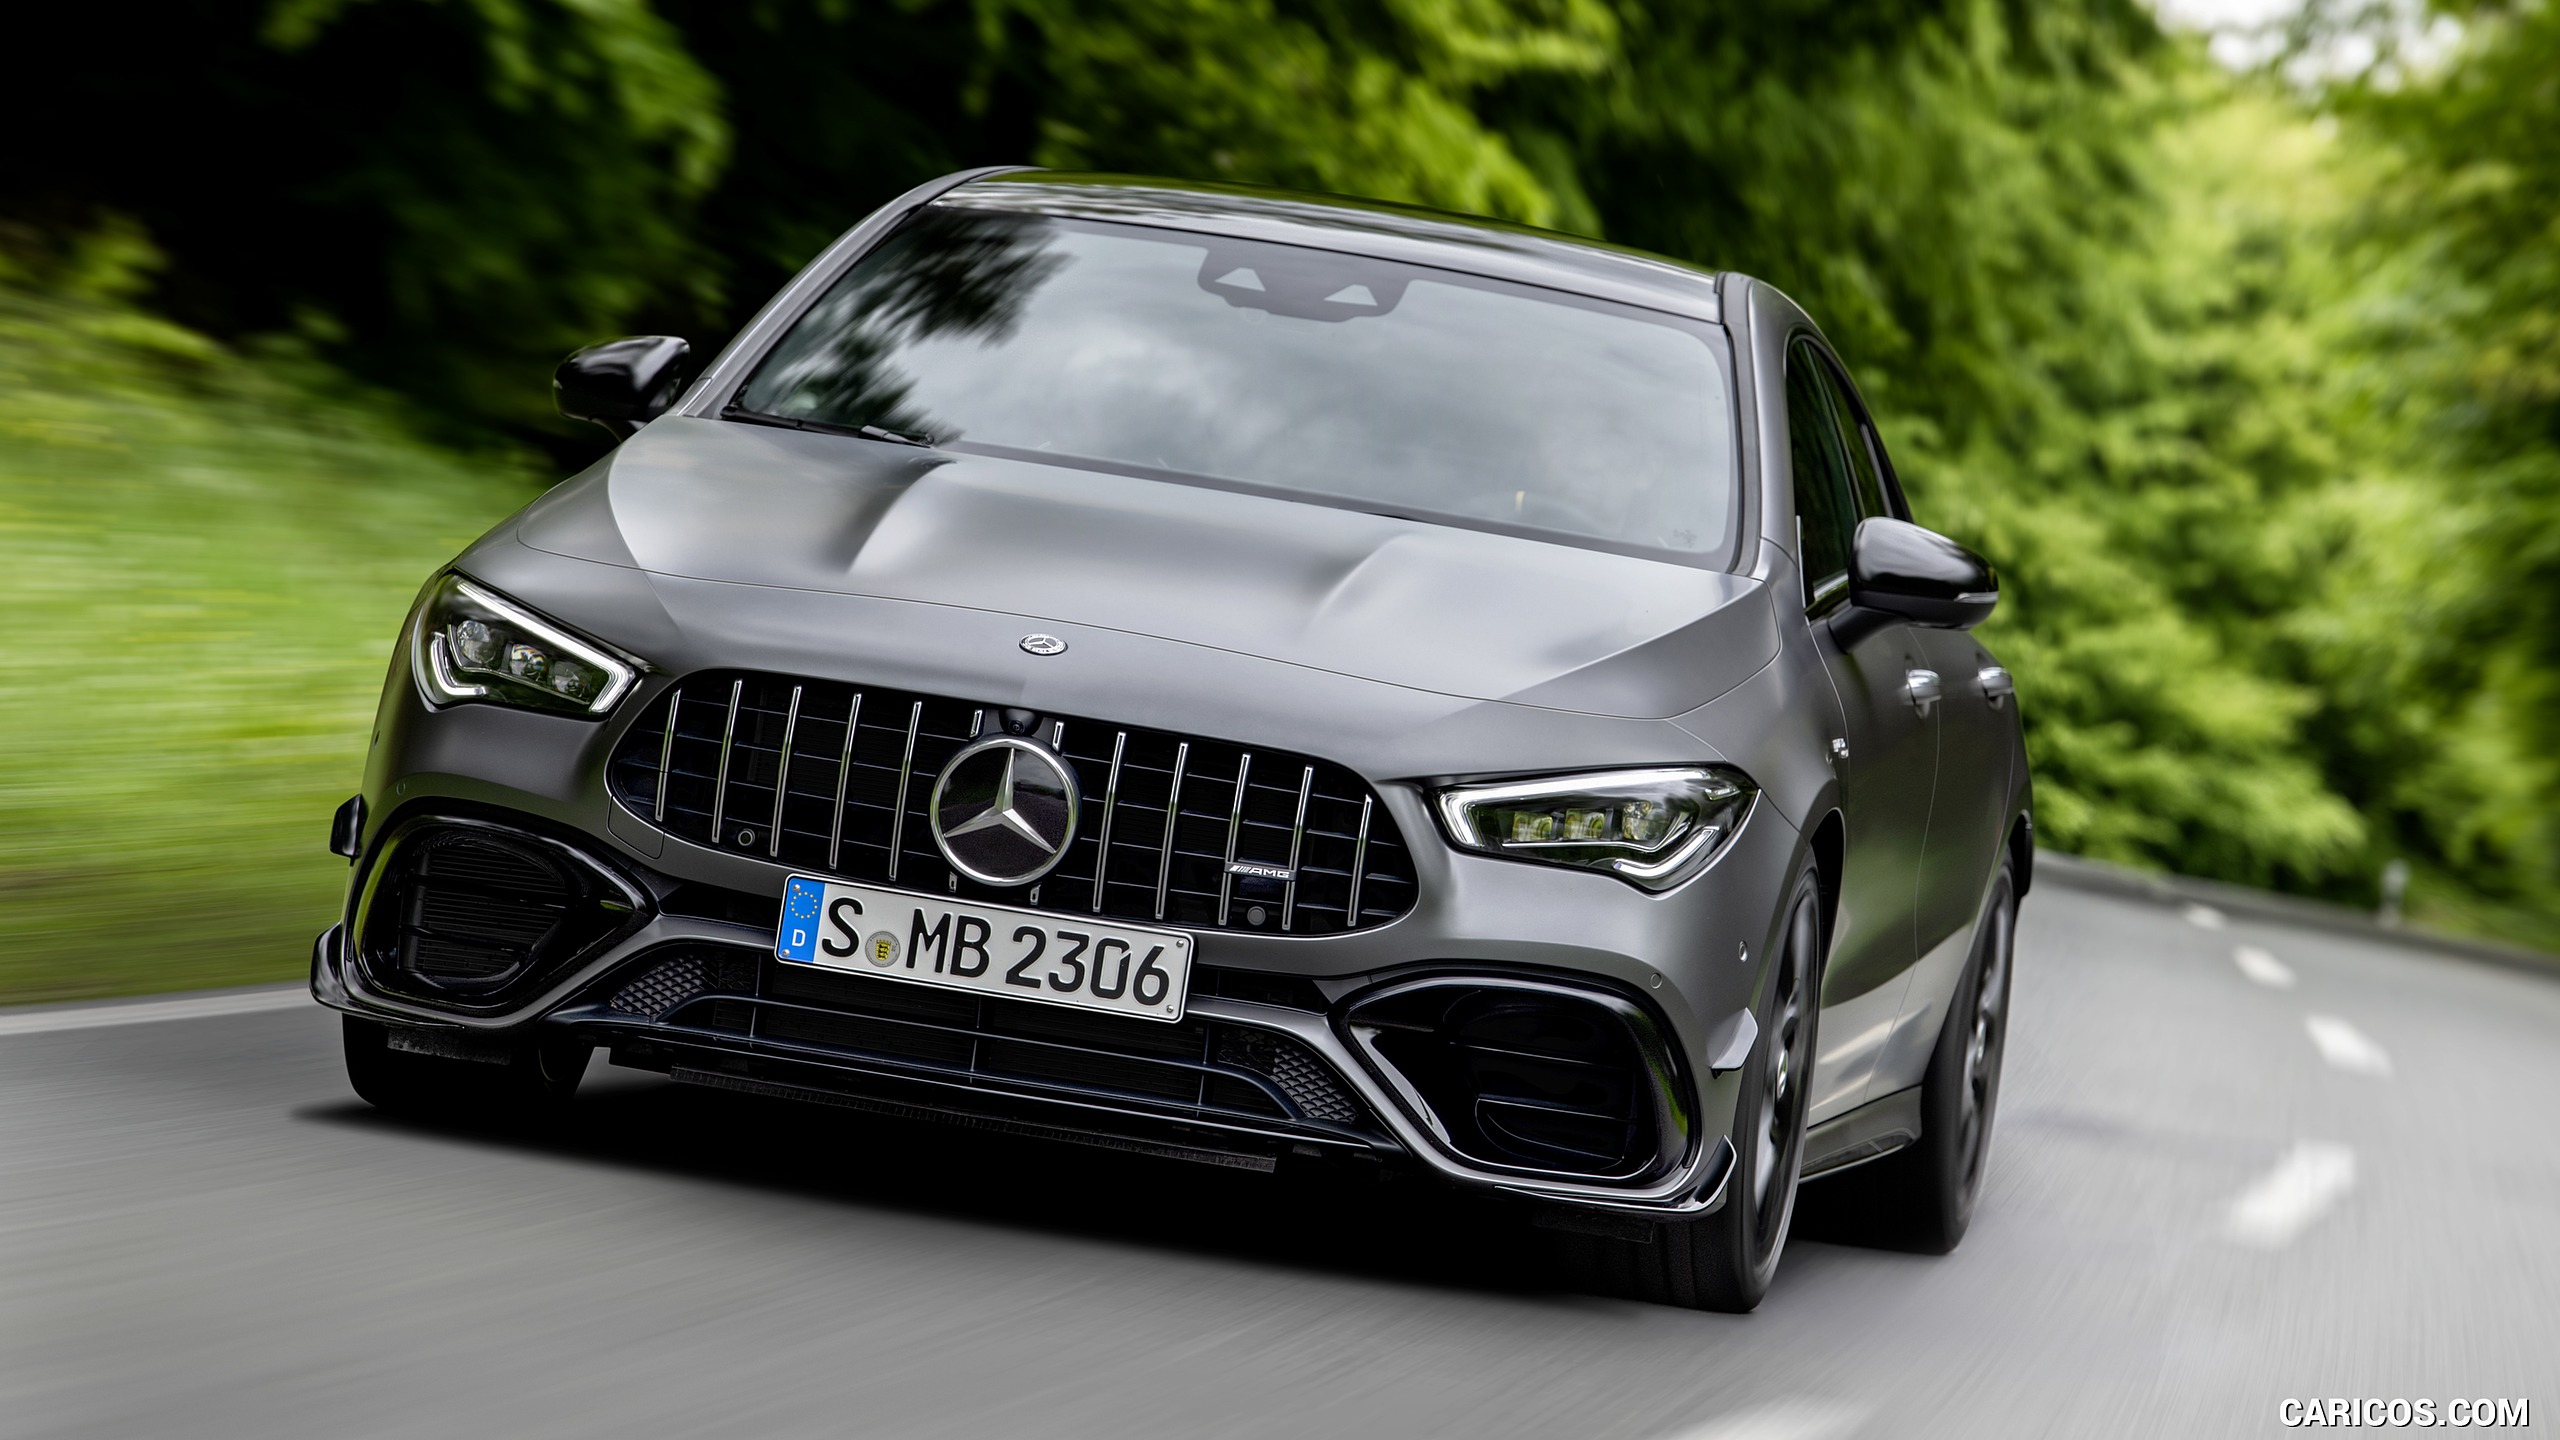 2020 Mercedes-AMG CLA 45 S 4MATIC+ - Front, #5 of 159